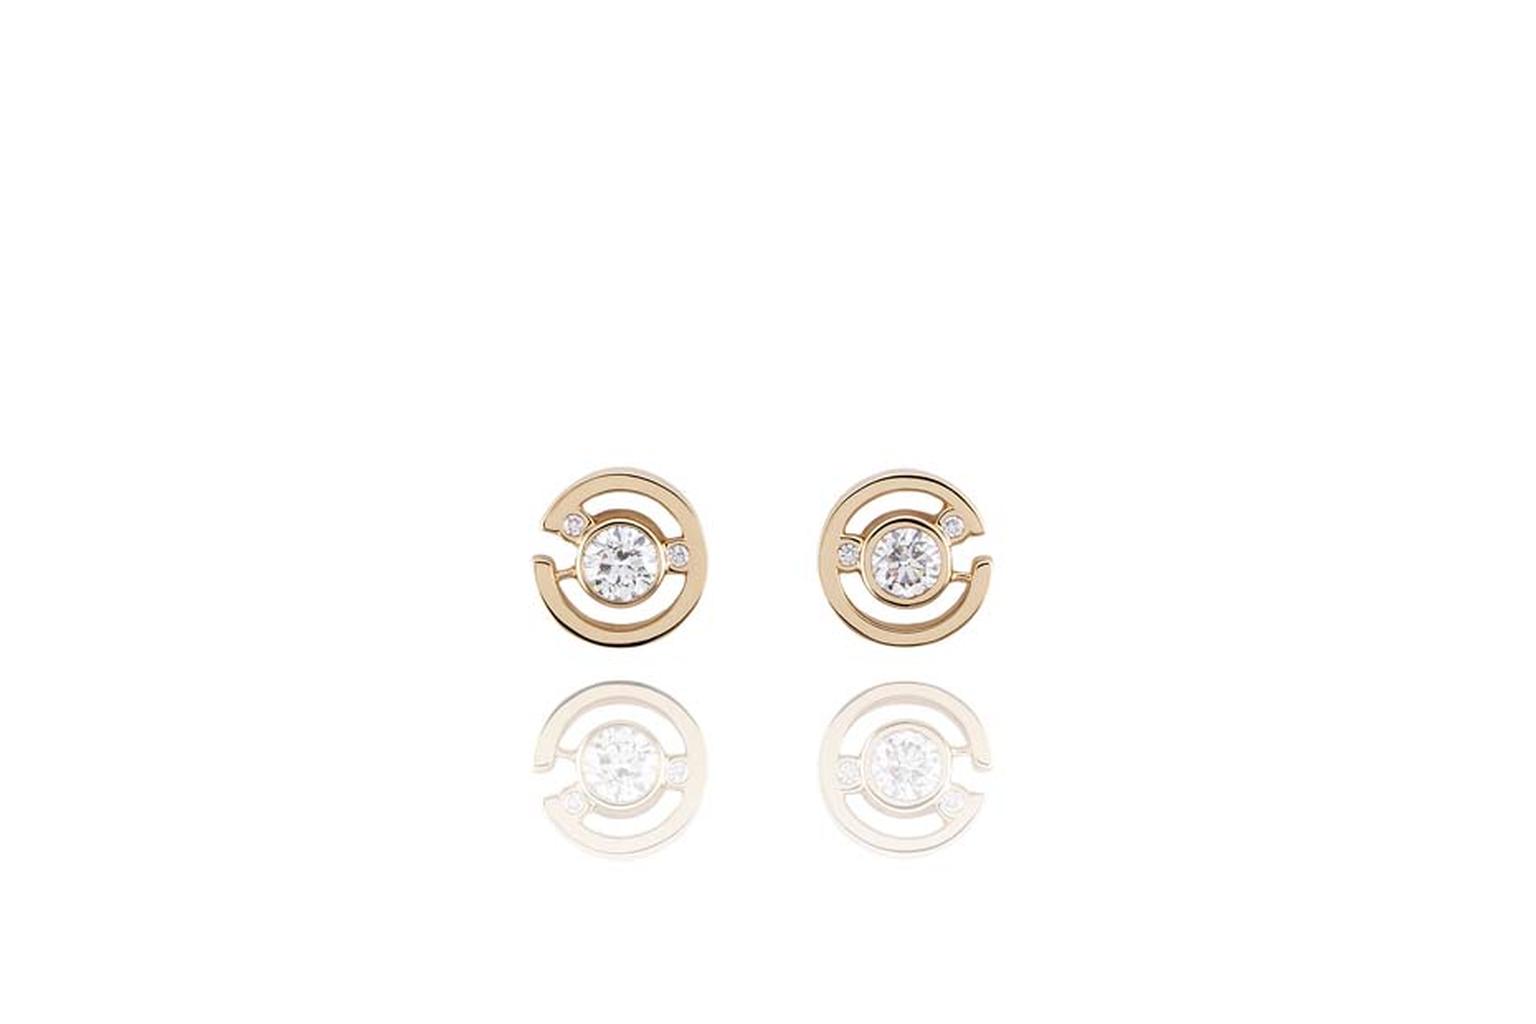 Boodles Maze collection diamond stud earrings in rose gold.